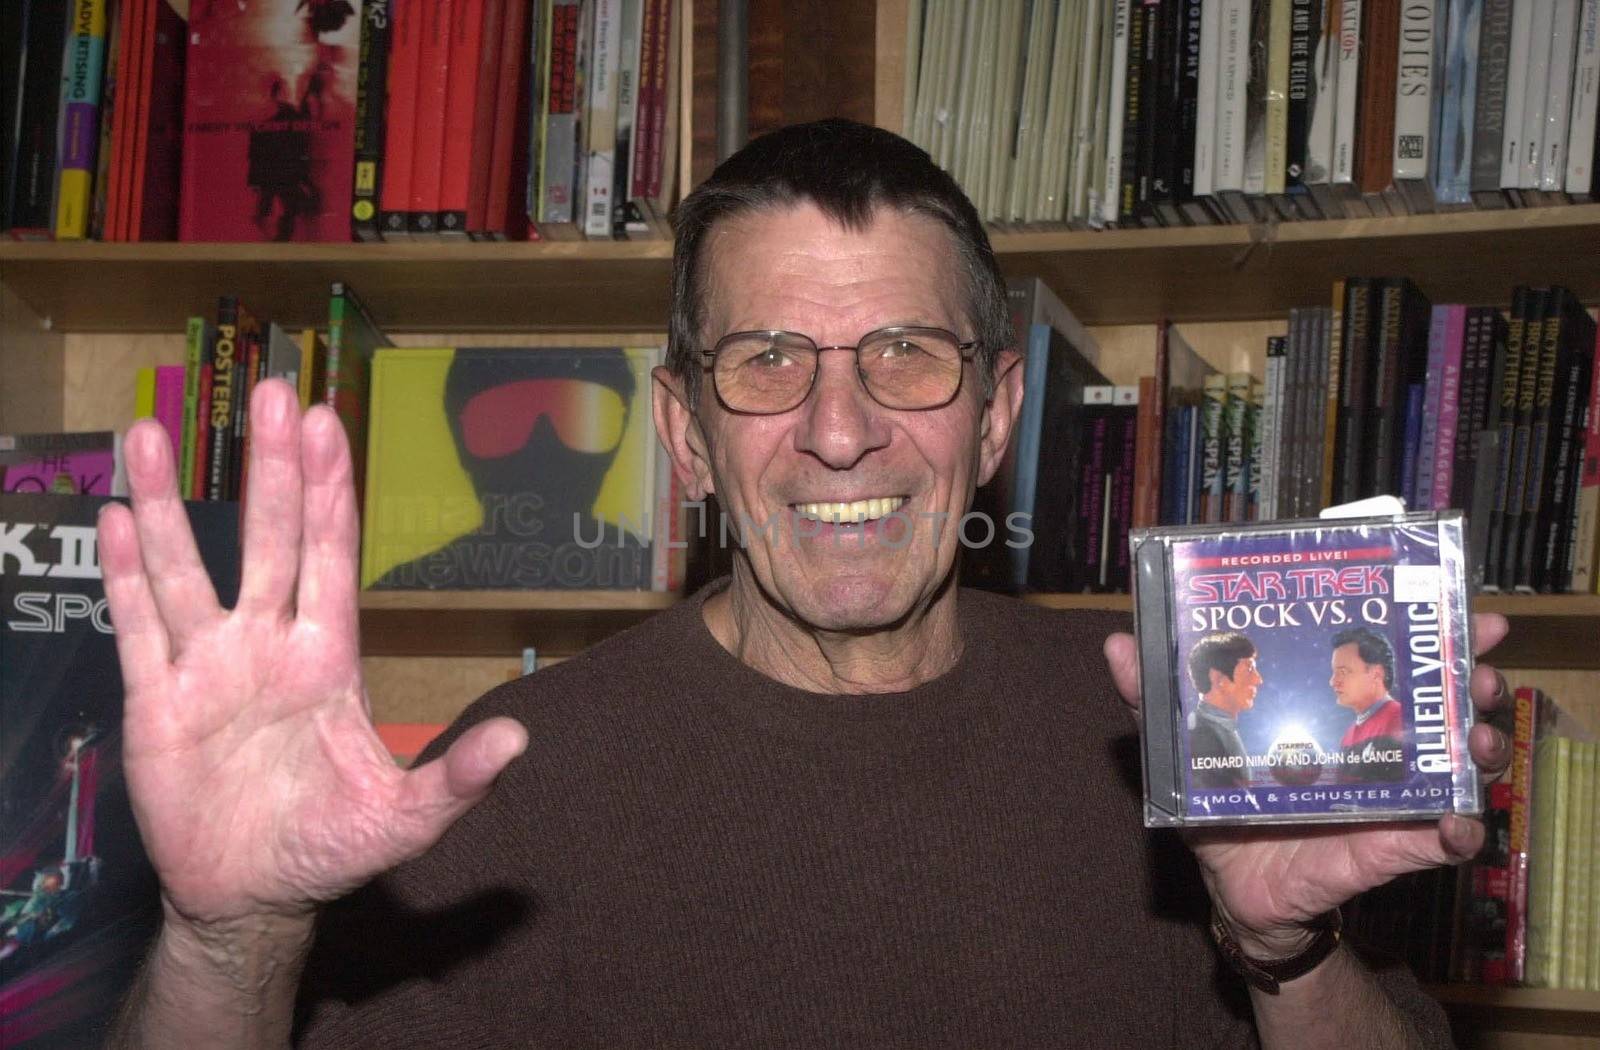 Leonard Nimoy at the Virgin Megastore in Hollywood to sign copies of the new DVD release of "Star Trek III: The Search For Spock," among other items, 04-26-00